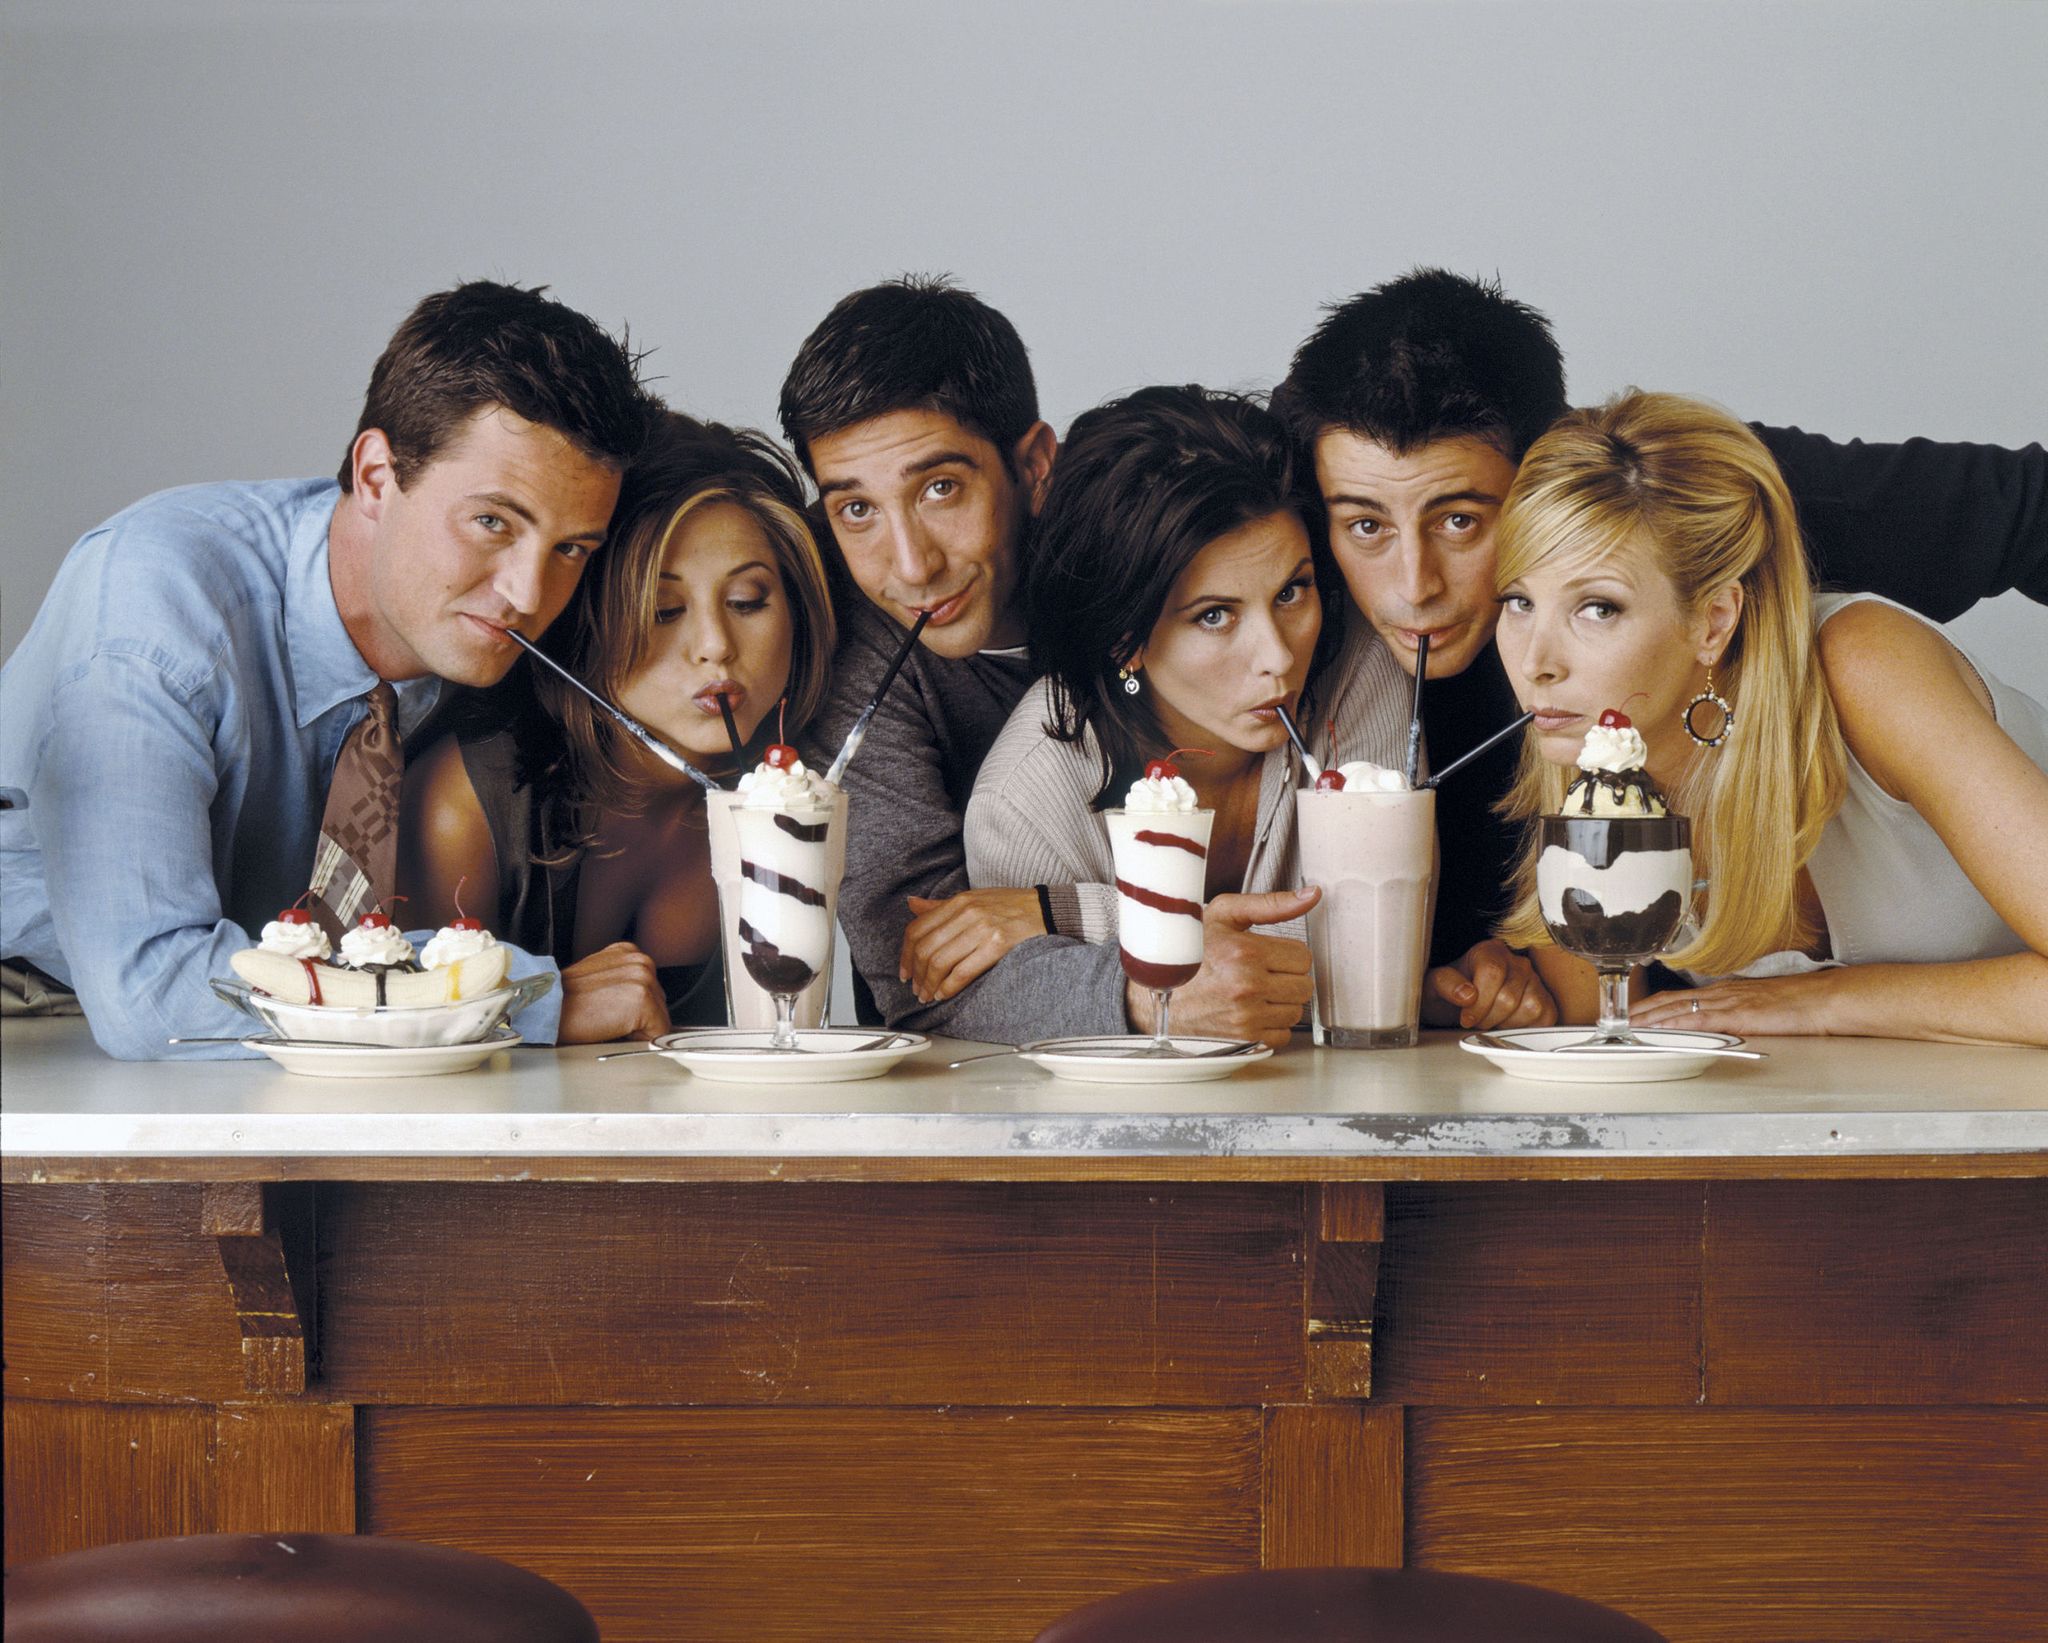 11 life lessons we learnt from Friends